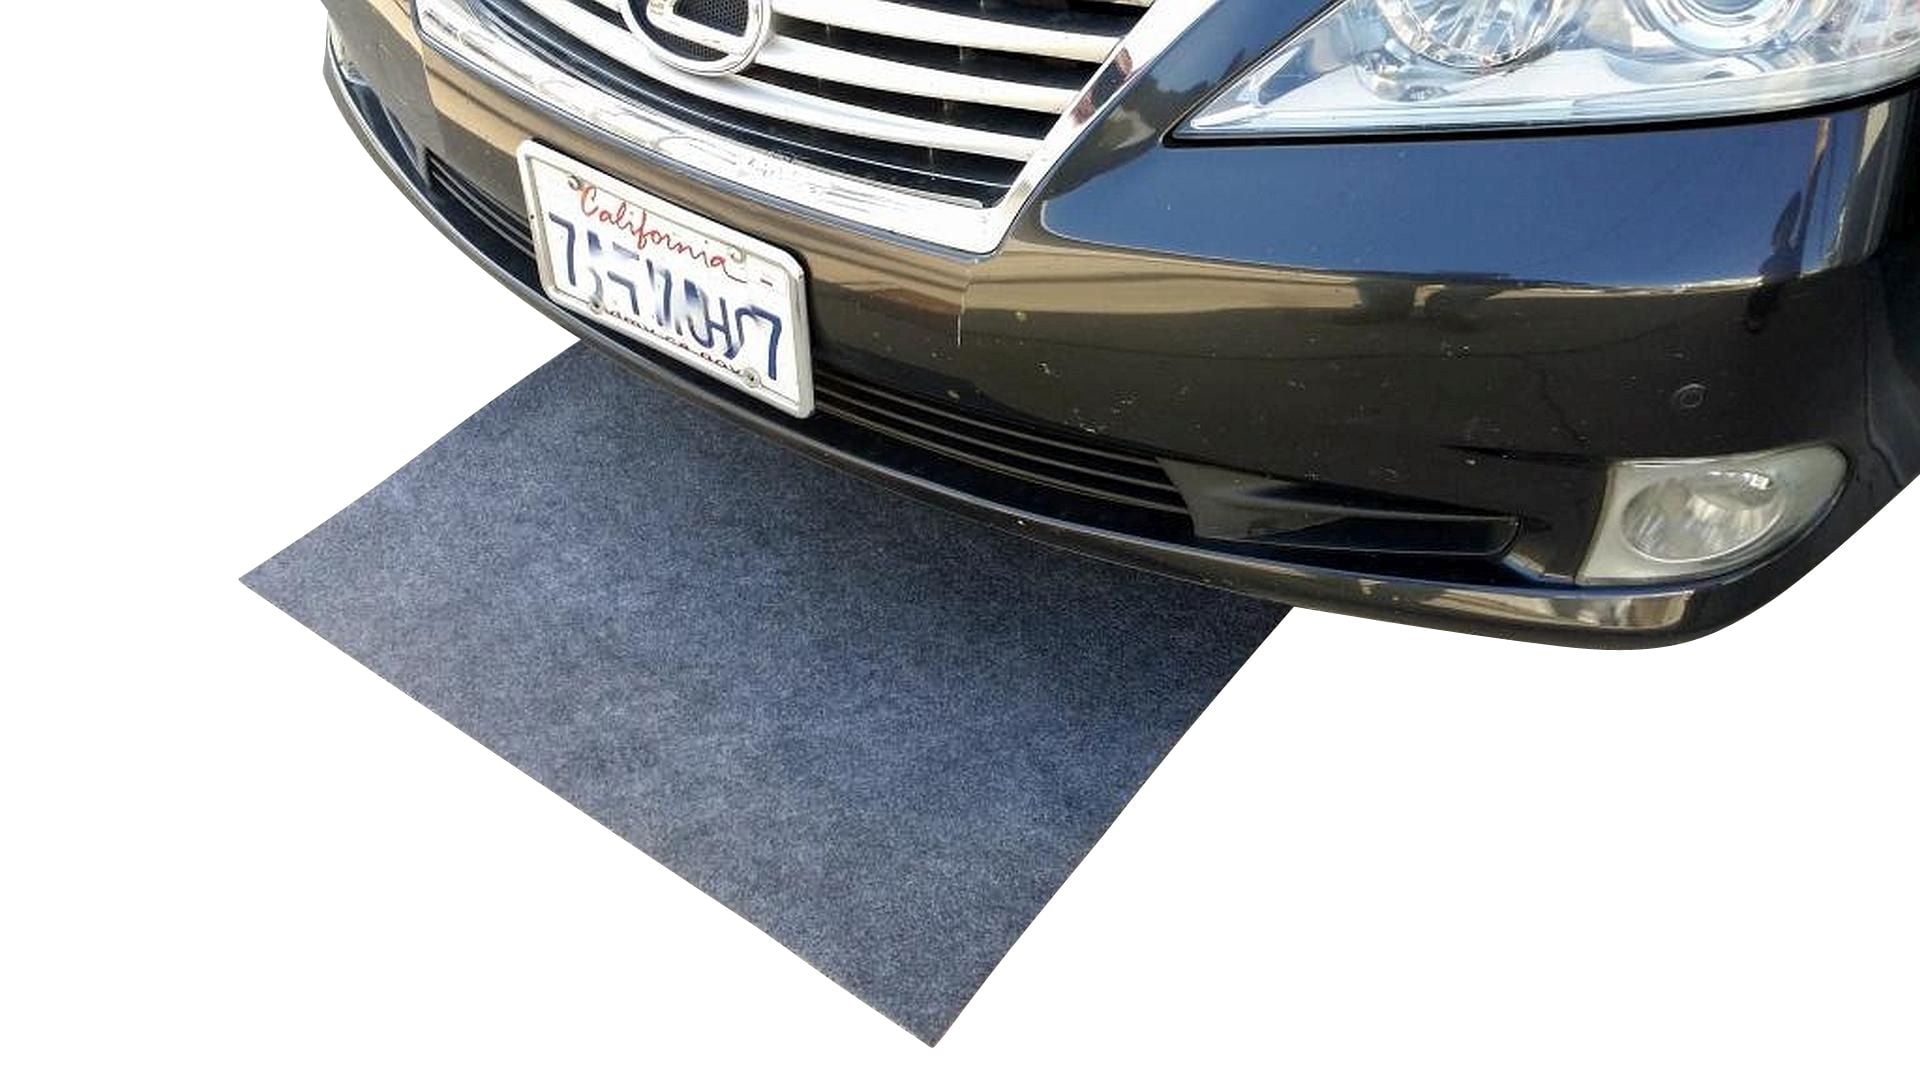 Garage Floor Mats For Cars: High-Quality Protection